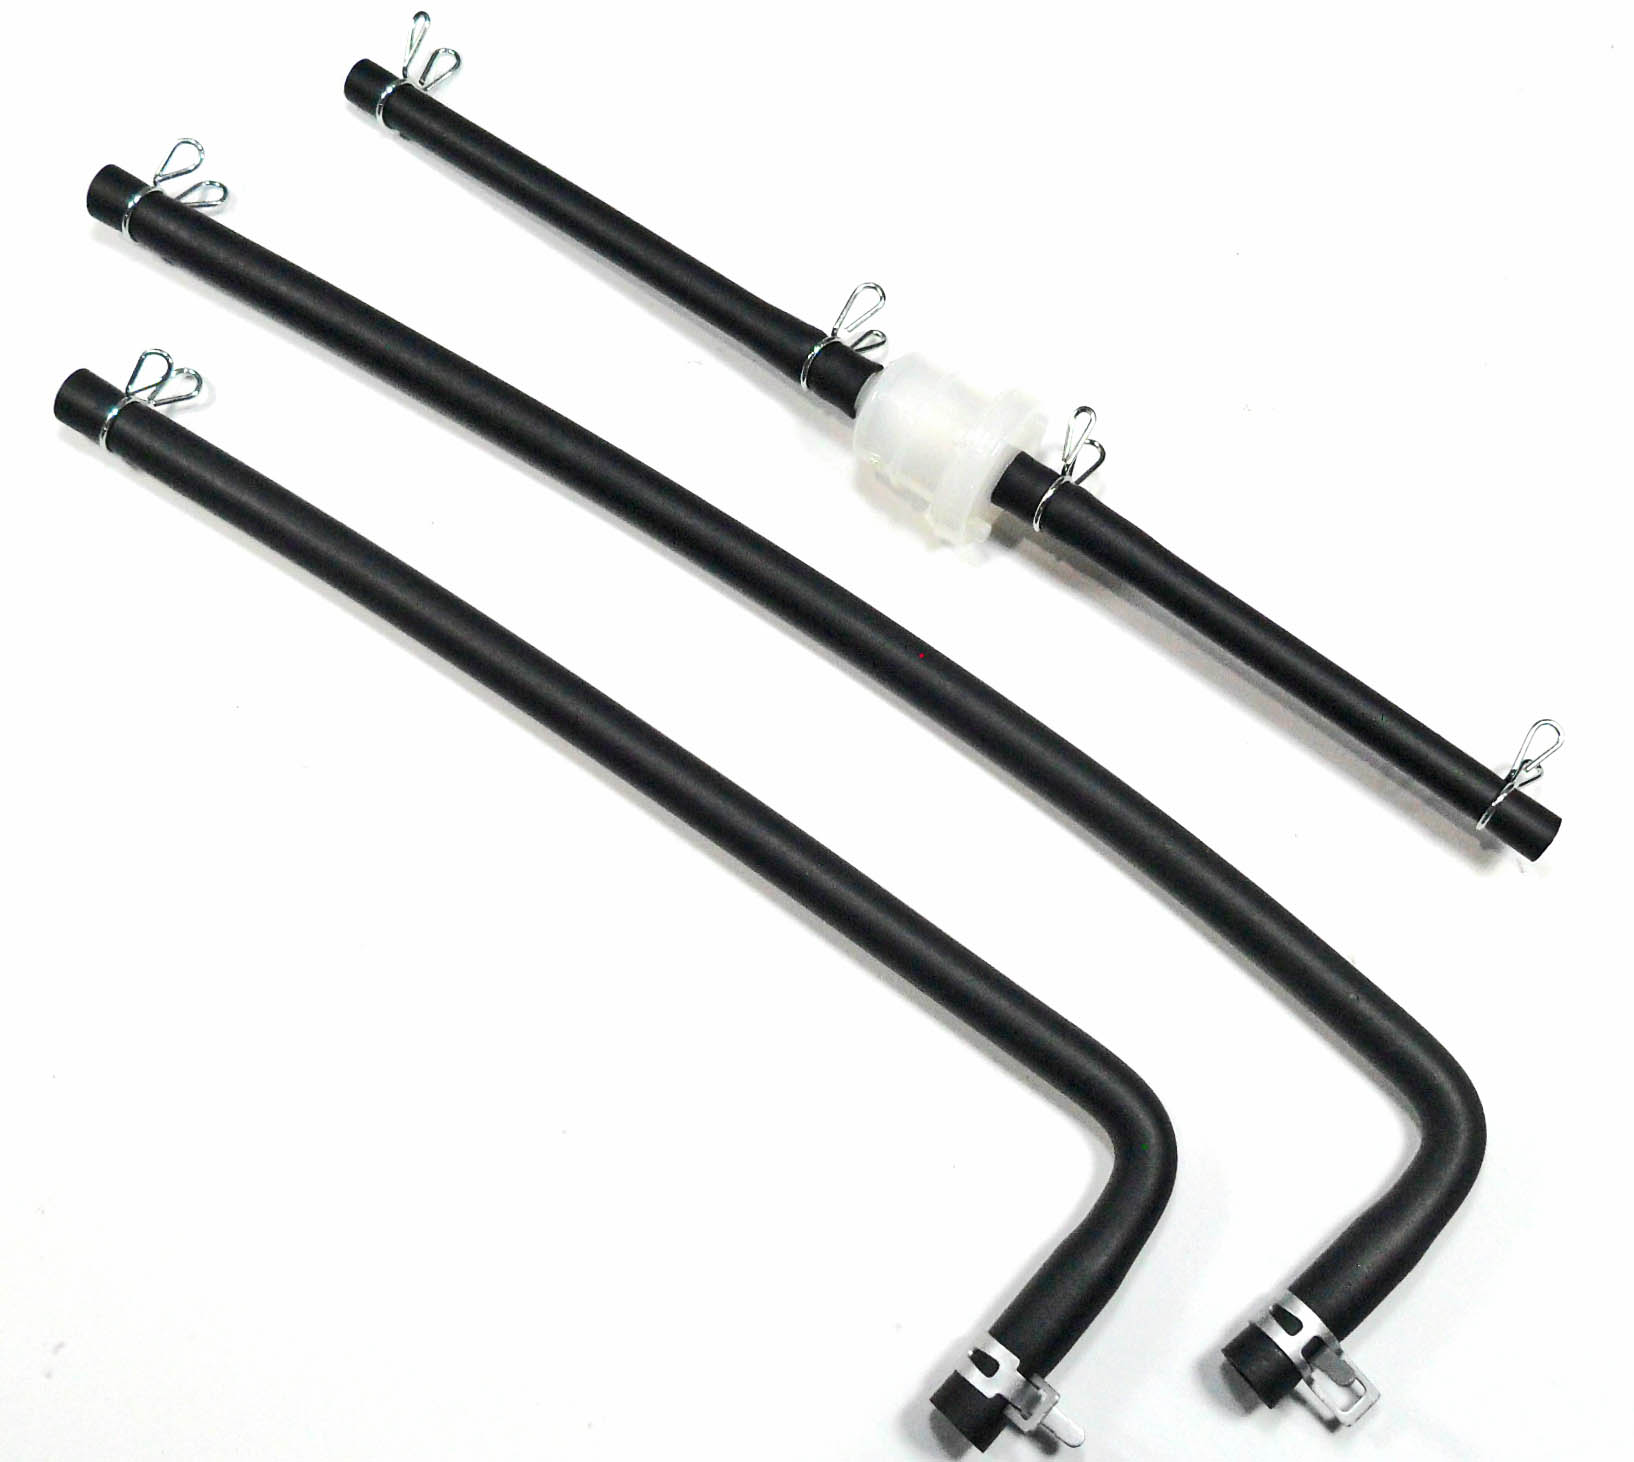 E-Ton 50cc 70cc 90cc ATV Fuel Line Kit Includes Primary Line, Reserve Line & Fuel Filer assembly The lines in this kit attach to the rear ports on the tank. Some older ETON's had open front ports. This kit will not work for those models.